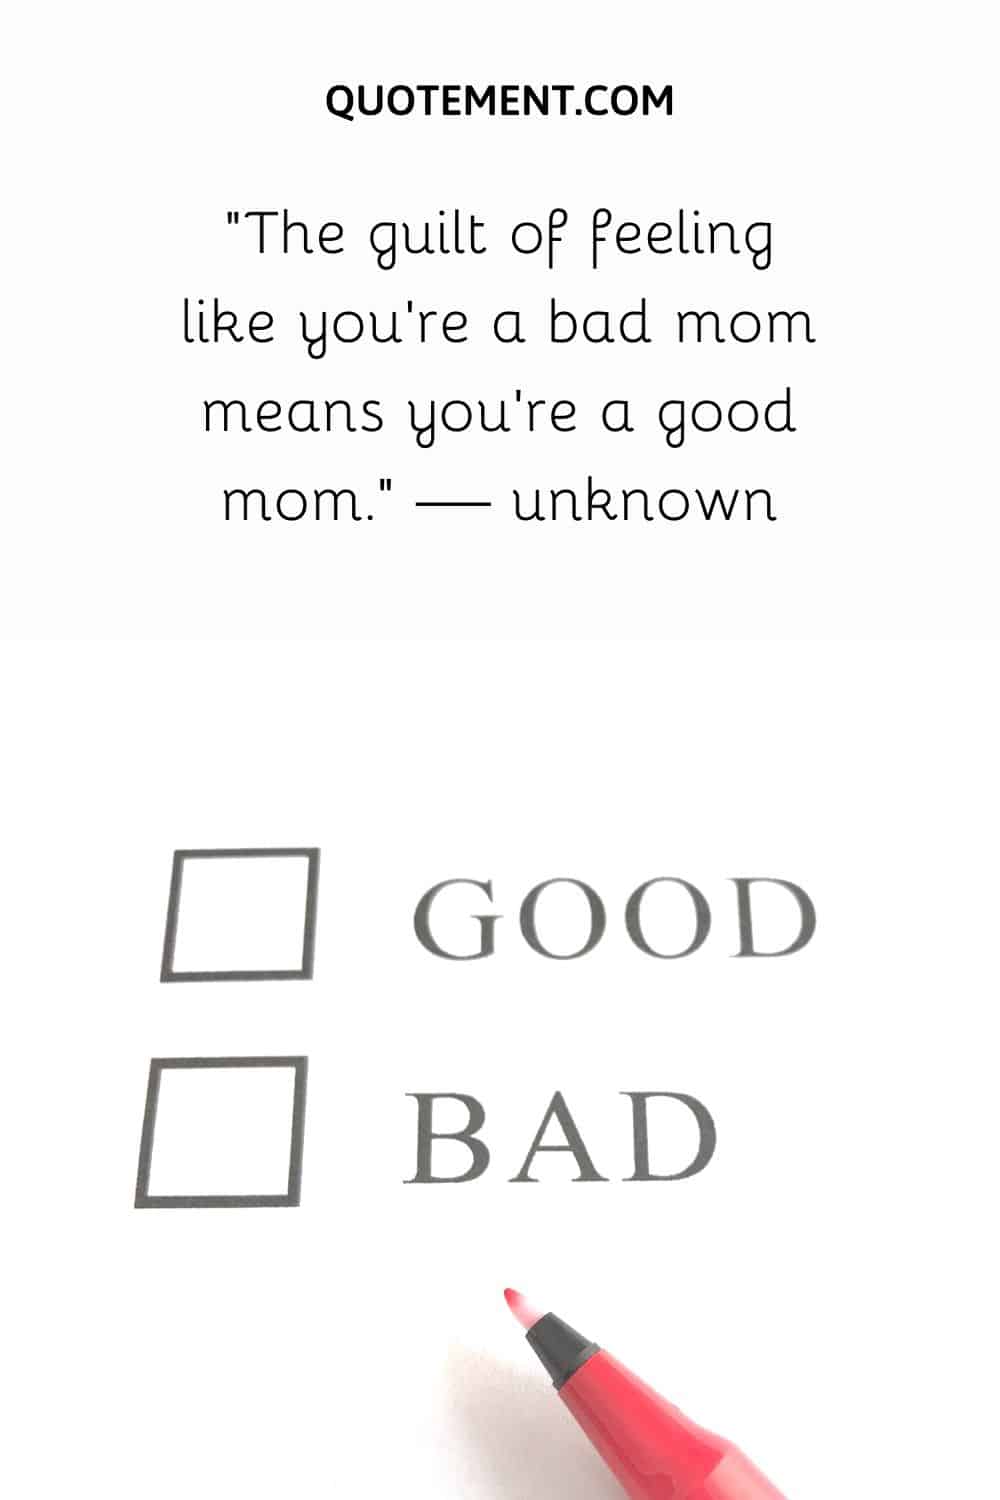 60 Best Bad Mom Quotes To Make Sure You're A Good One!